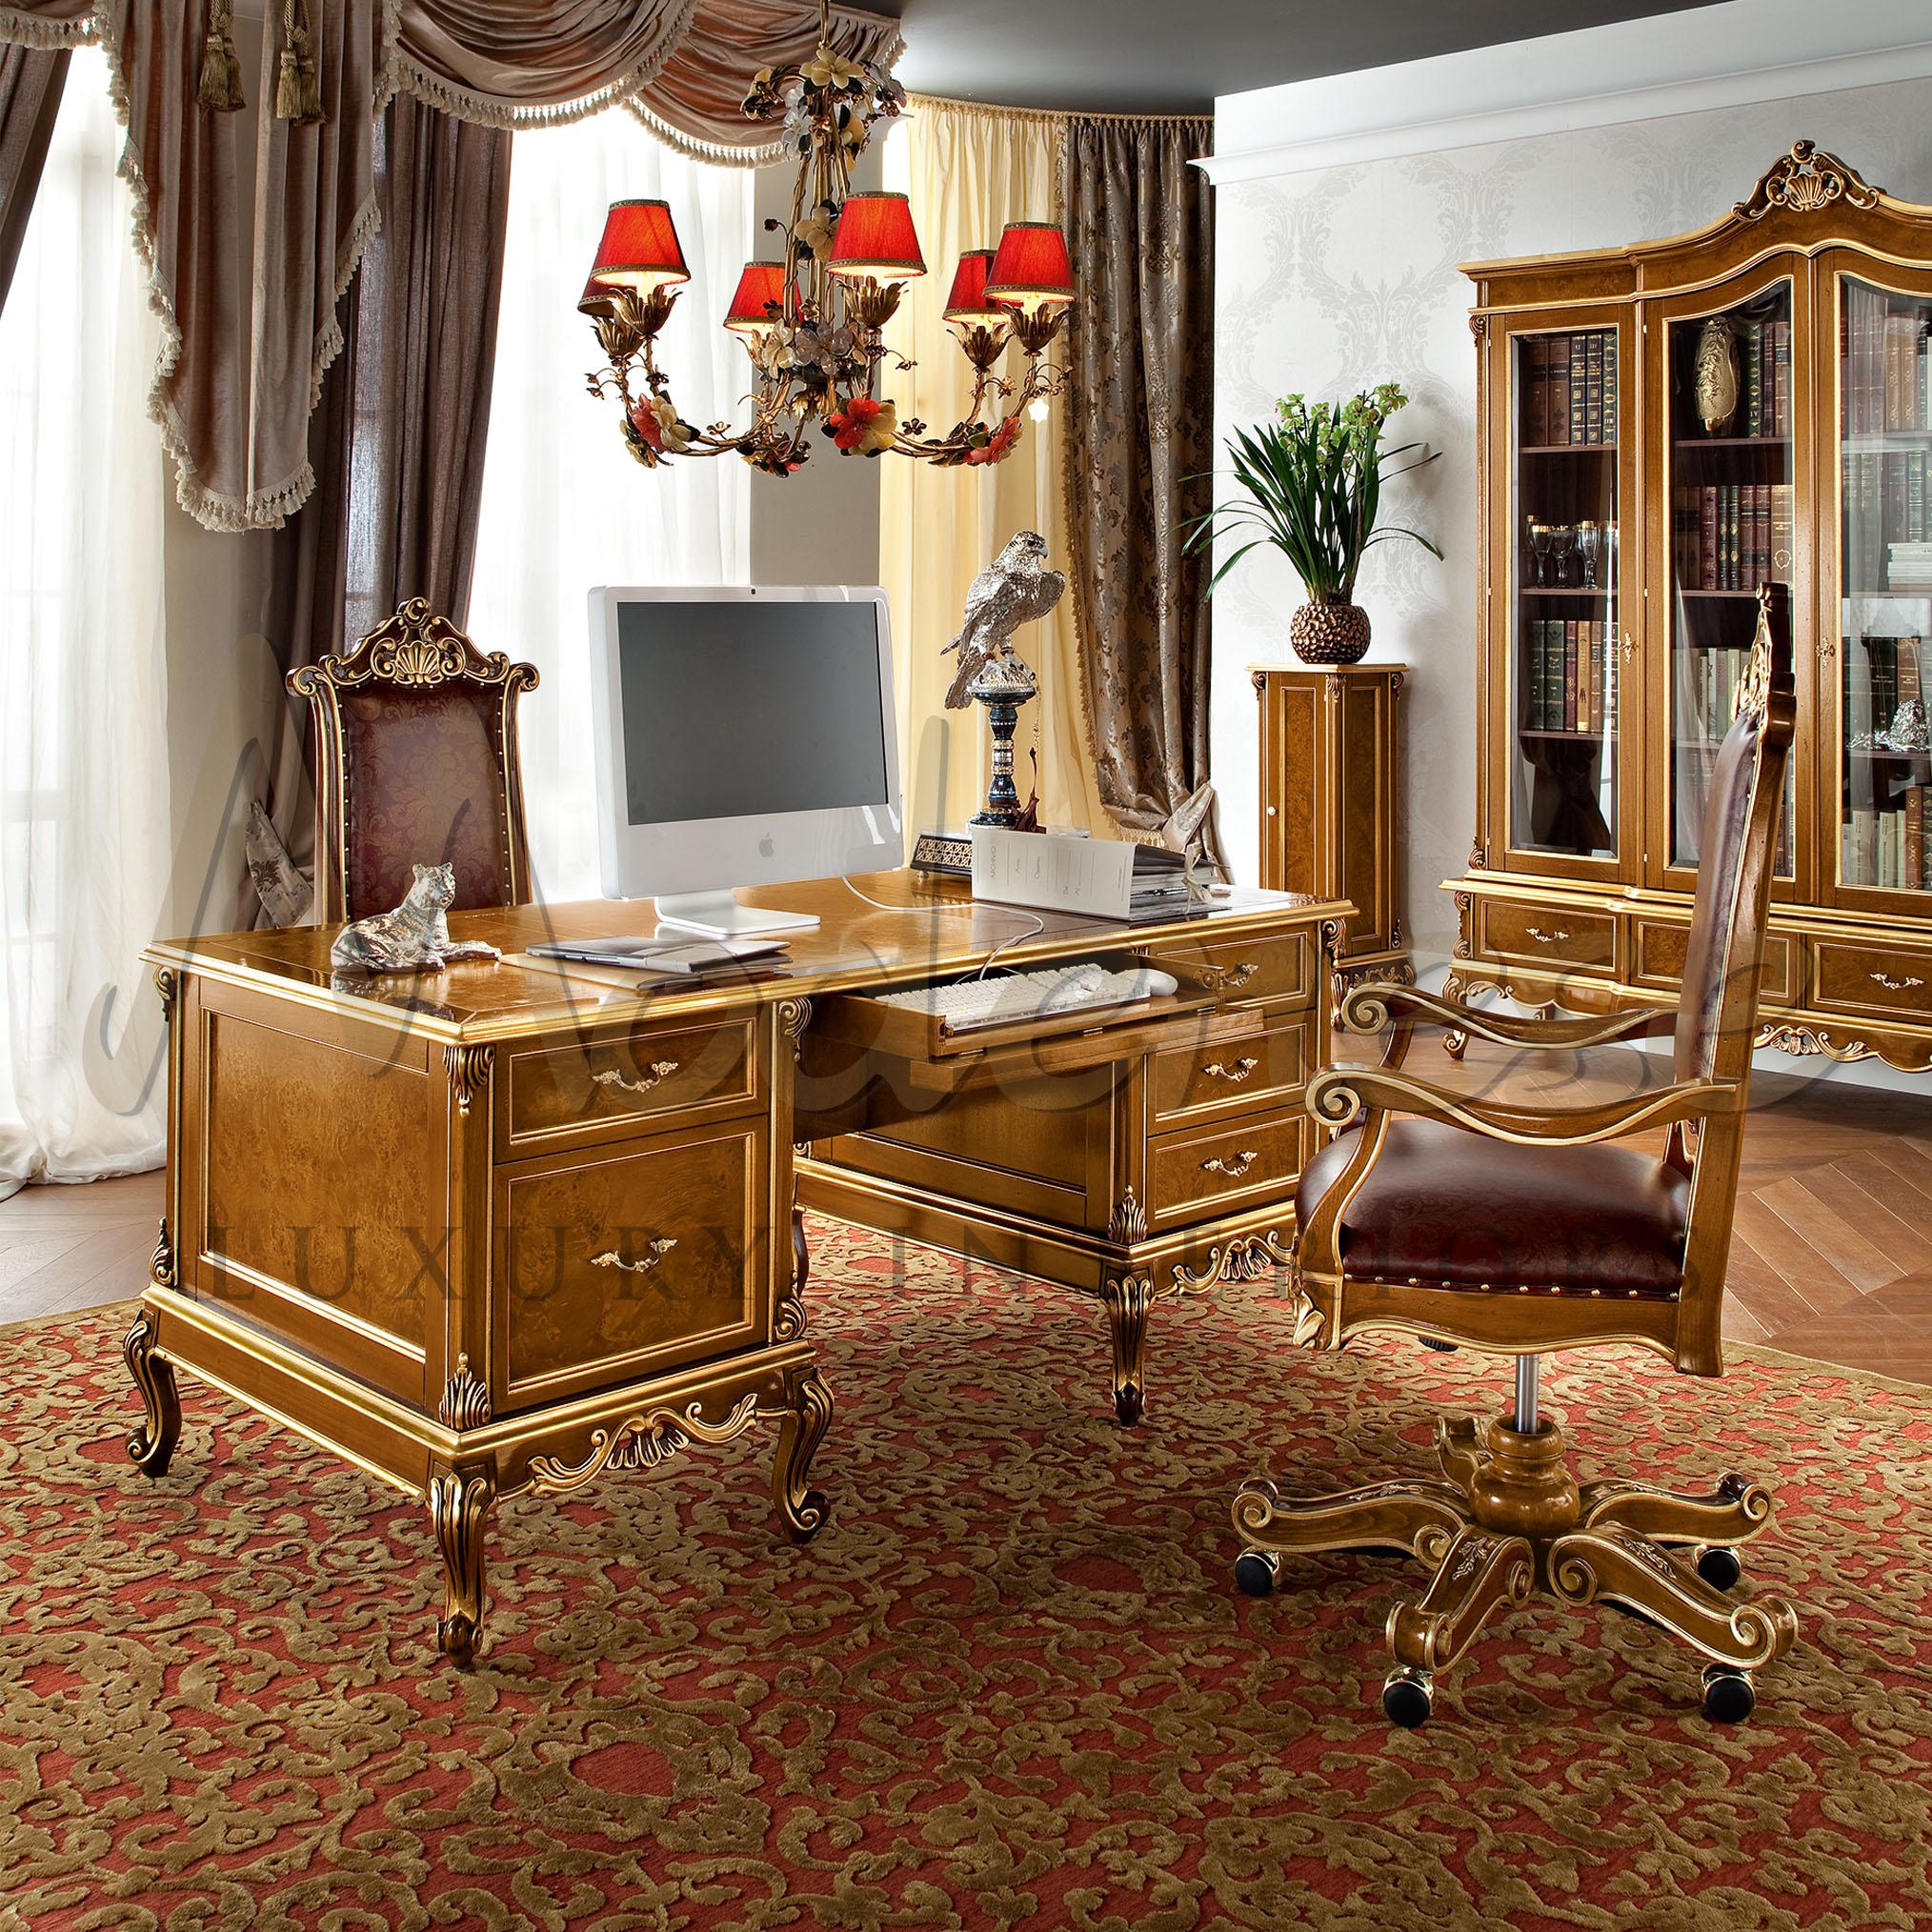 Decorate your CEO office with a high-end Italian baroque open desk from the artisanal producer Modenese Luxury Interiors. This solid wood presidential desk features a keybord tray with hinged flap, five spacious drawers with Blumotion soft-closing